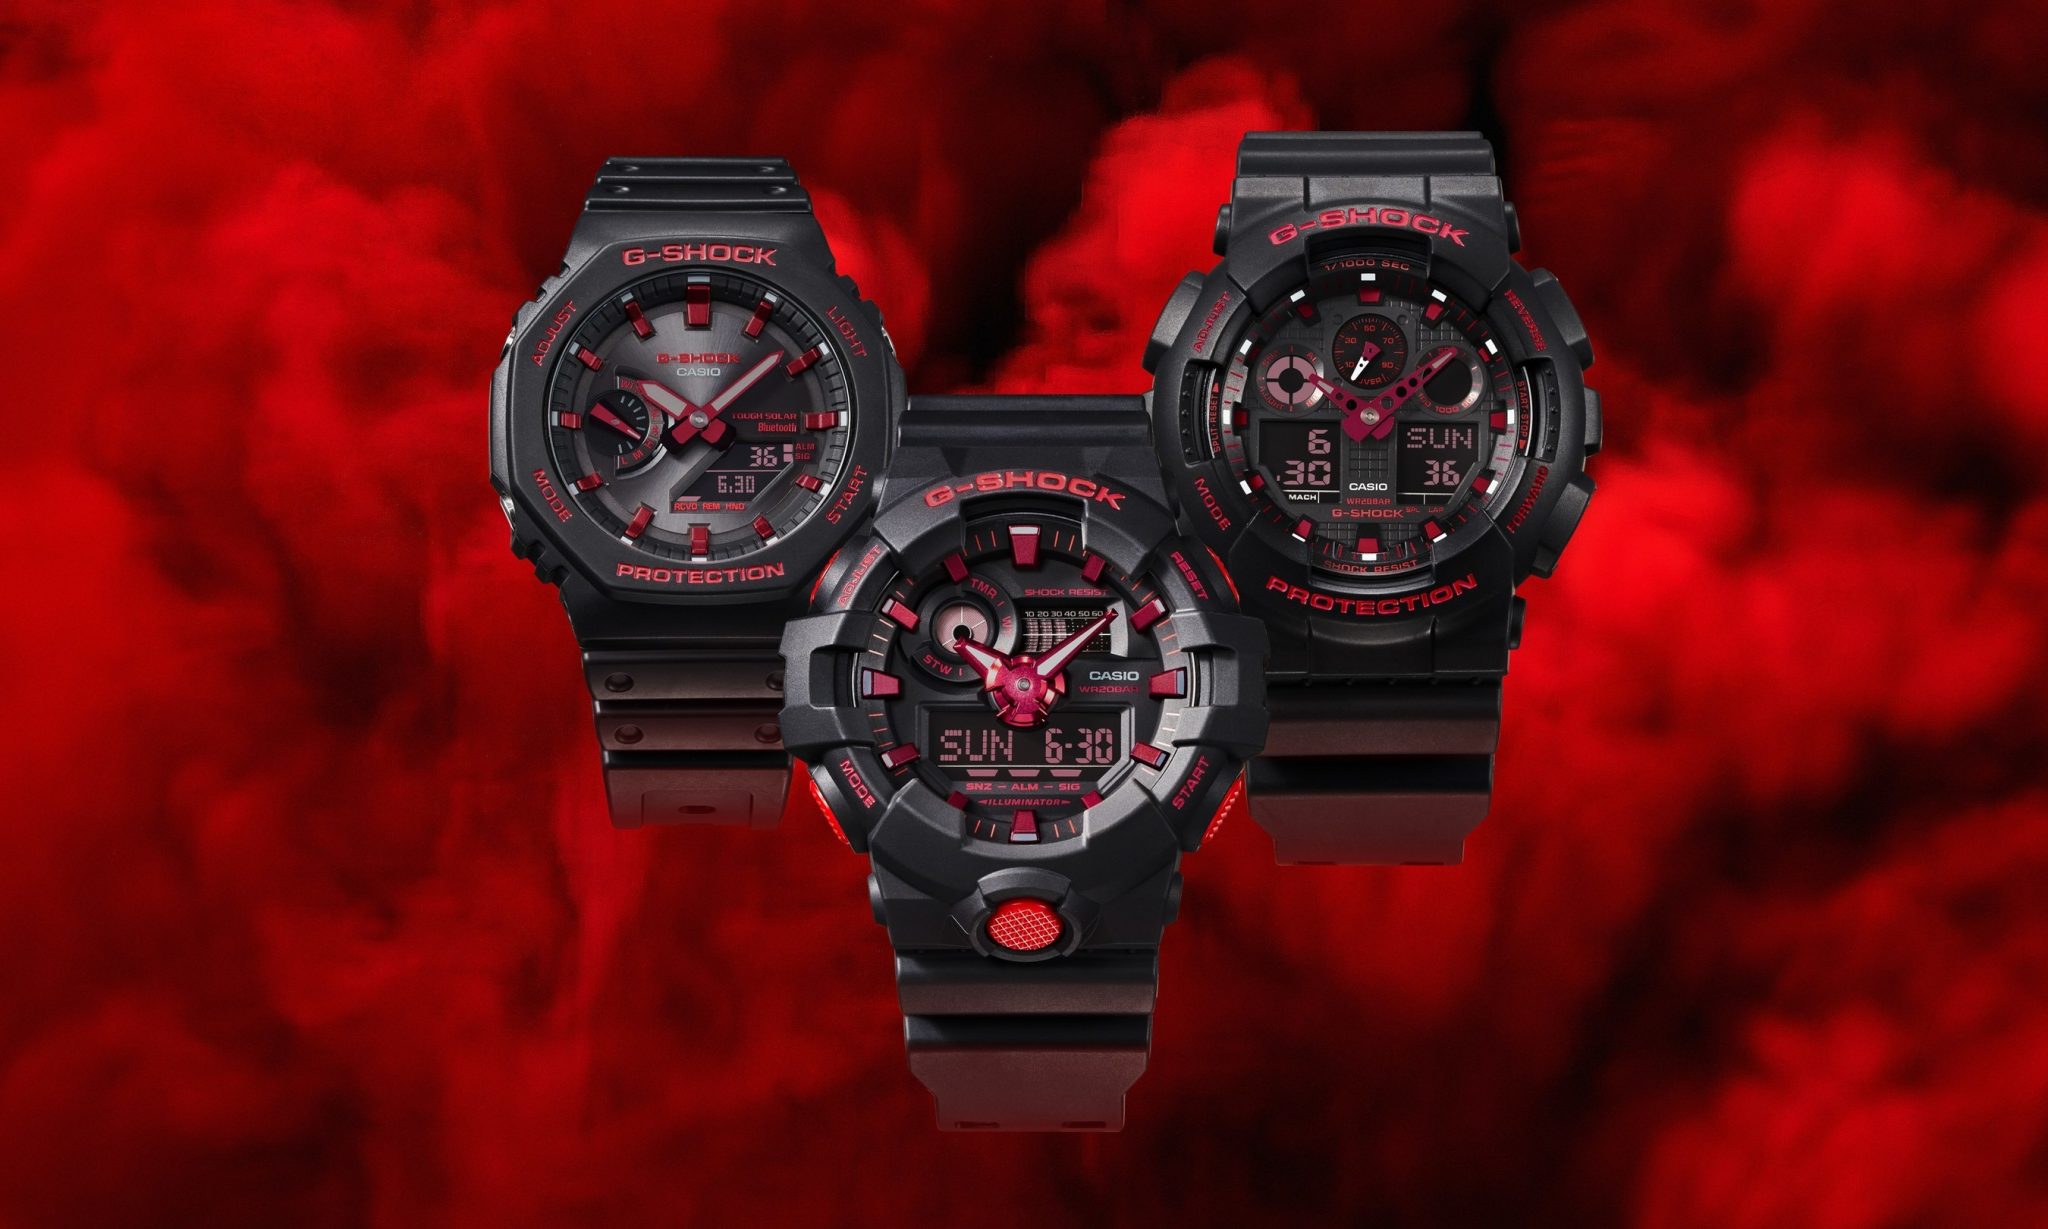 G-SHOCK turns up the heat with new Ignite Red collection